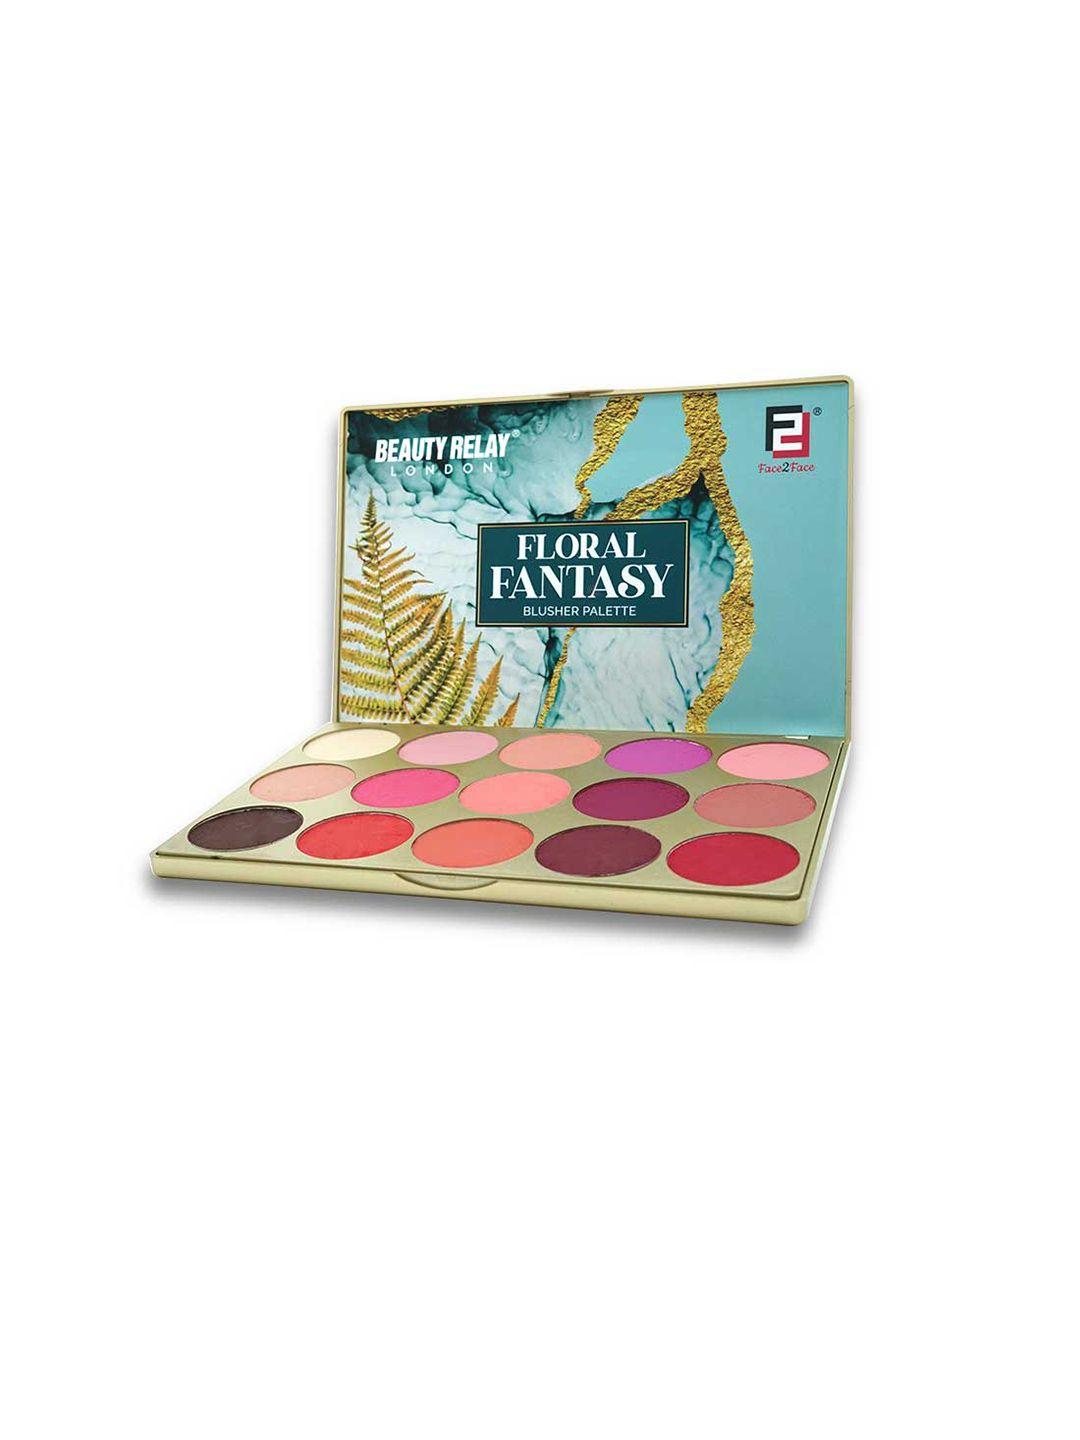 beautyrelay london face 2 face floral fantasy blusher palette with 15 shades